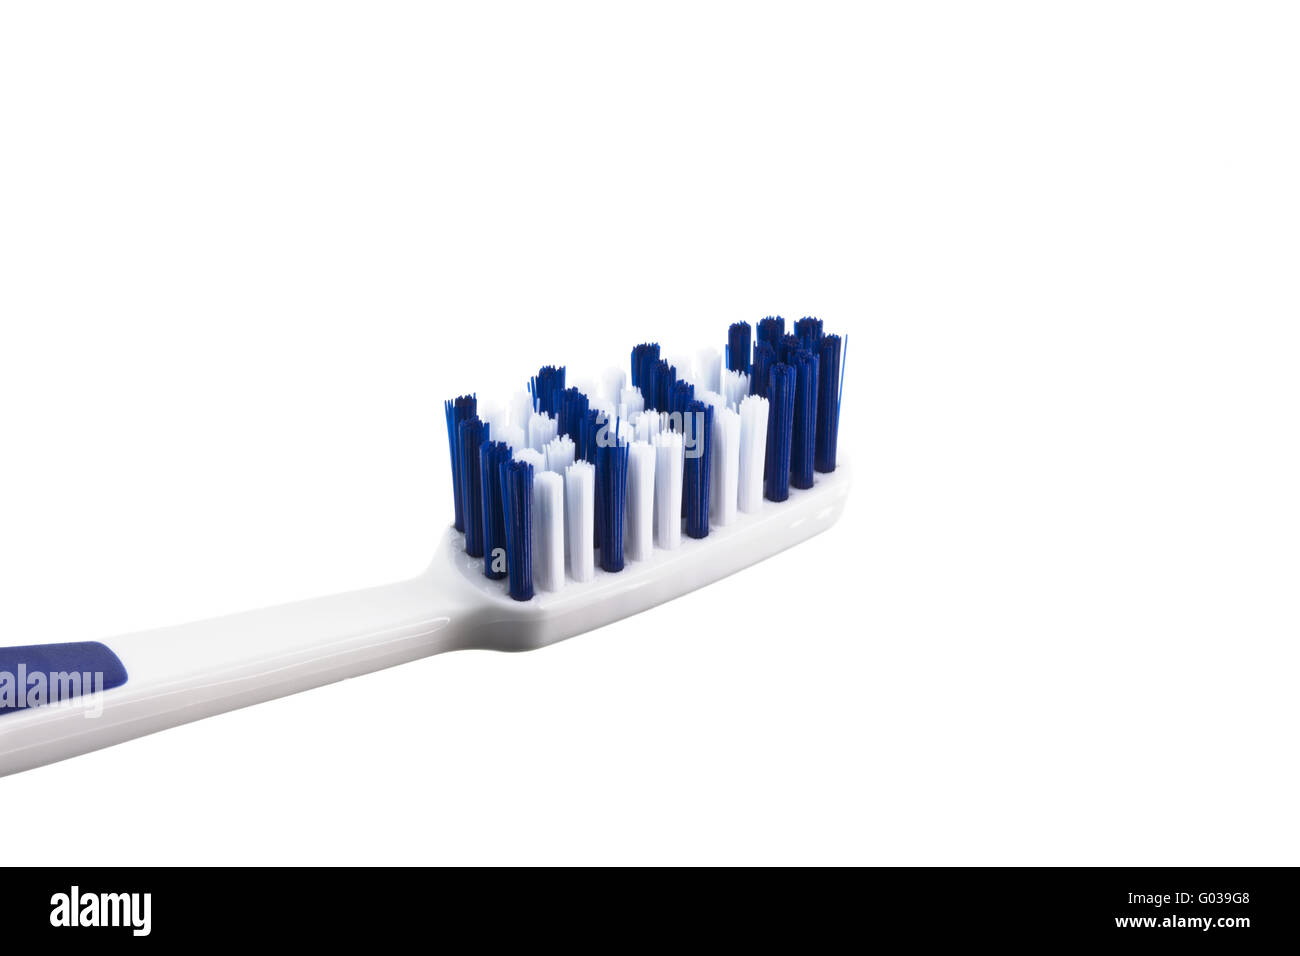 Normal toothbrush for the daily dental care Stock Photo